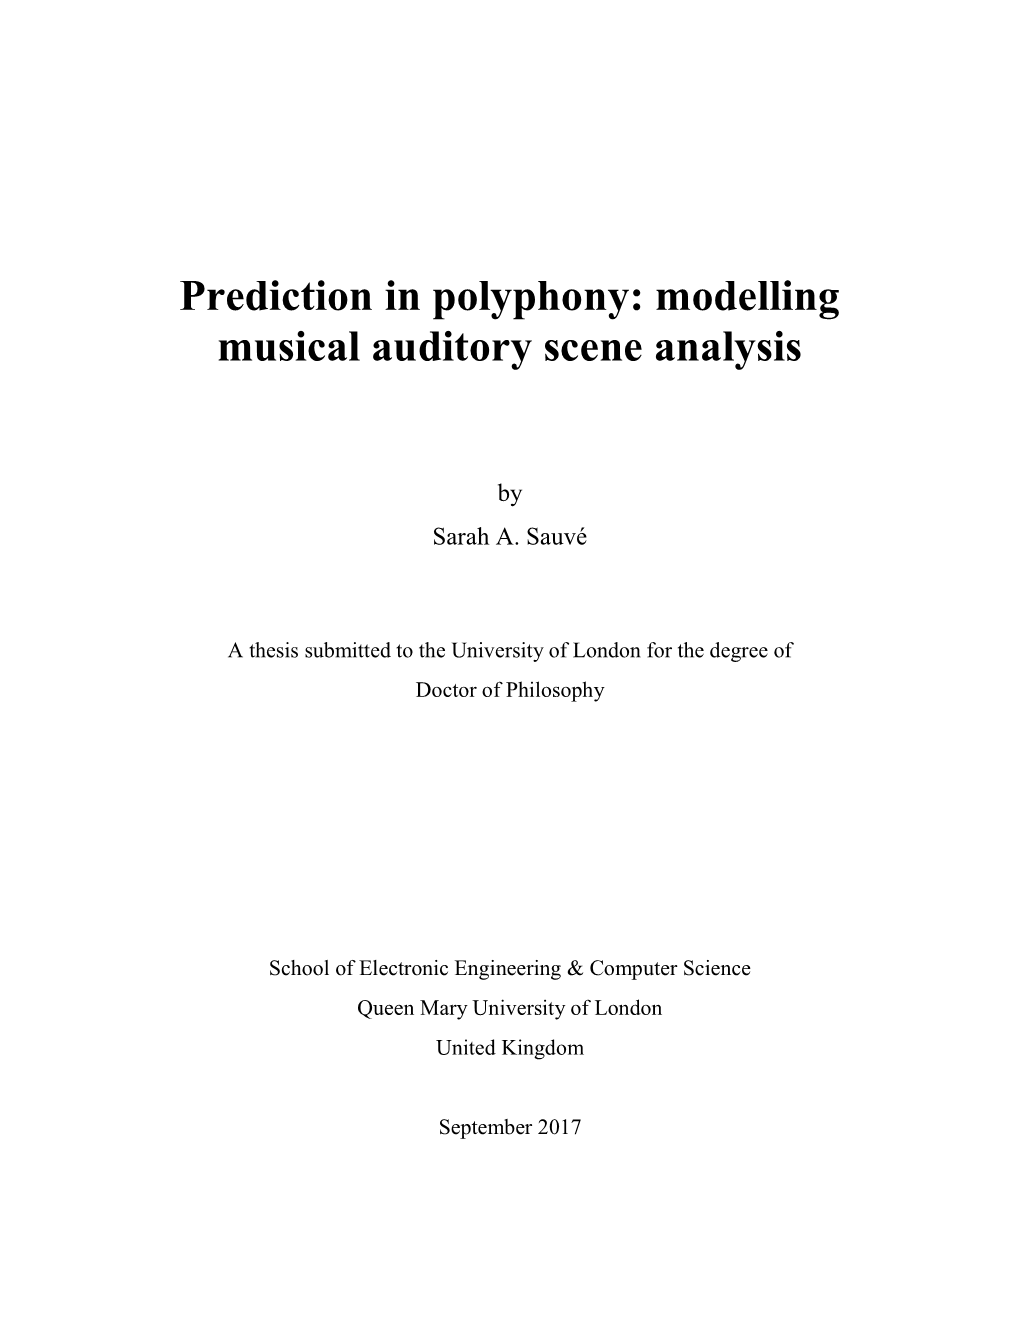 Prediction in Polyphony: Modelling Musical Auditory Scene Analysis